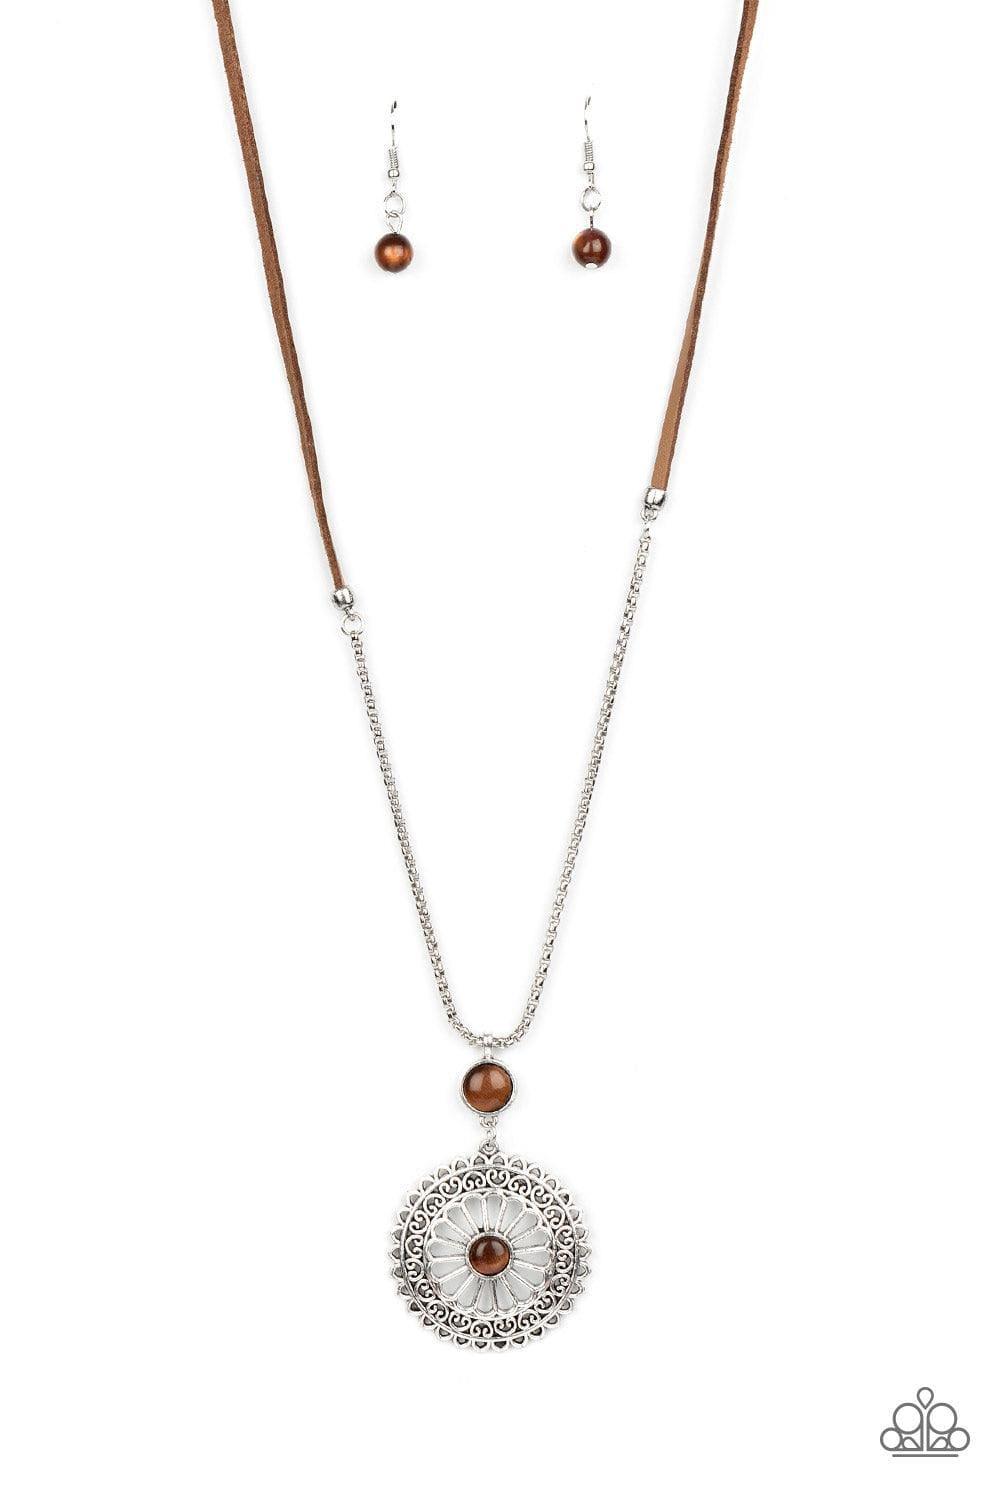 Paparazzi Accessories - Where No Mandala Has Gone Before - Brown Necklace - Bling by JessieK